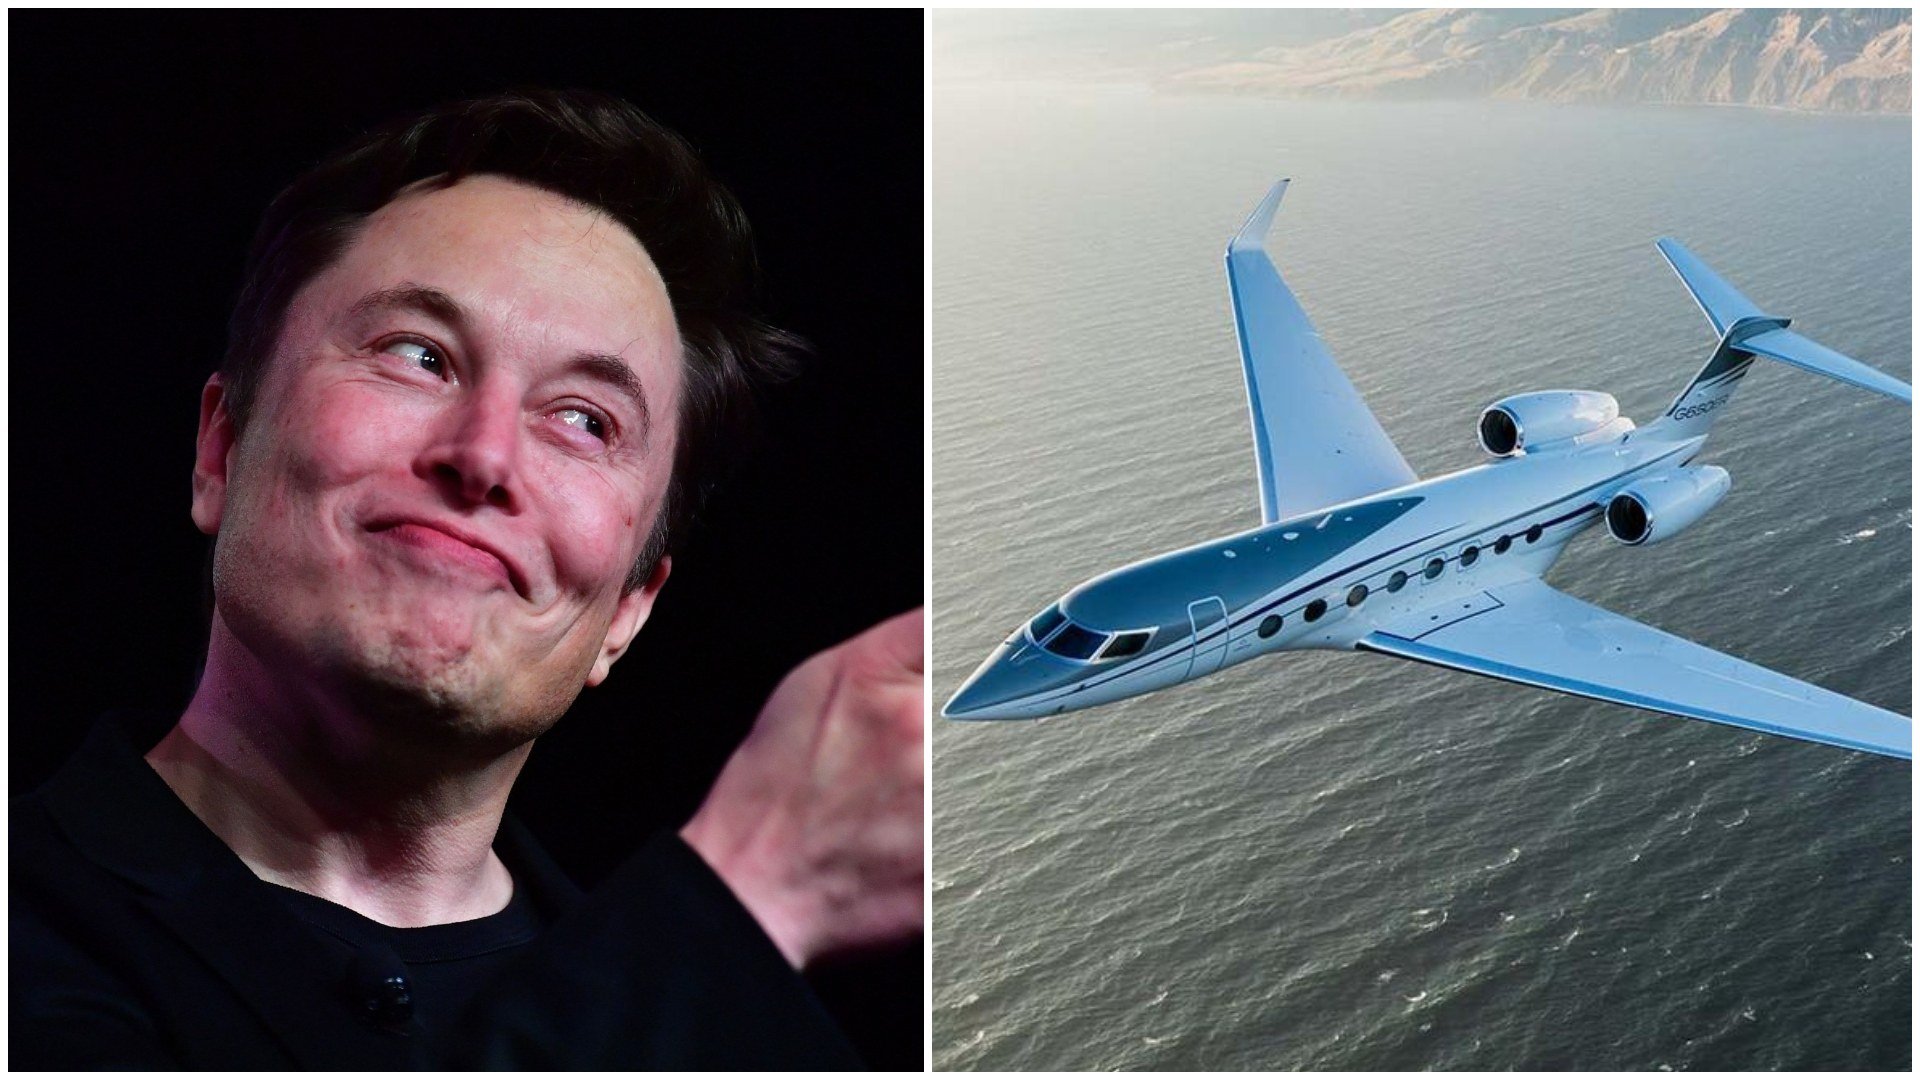 Elon Musk and a G650ER in the air. Photos: AFP; Luxurylaunches